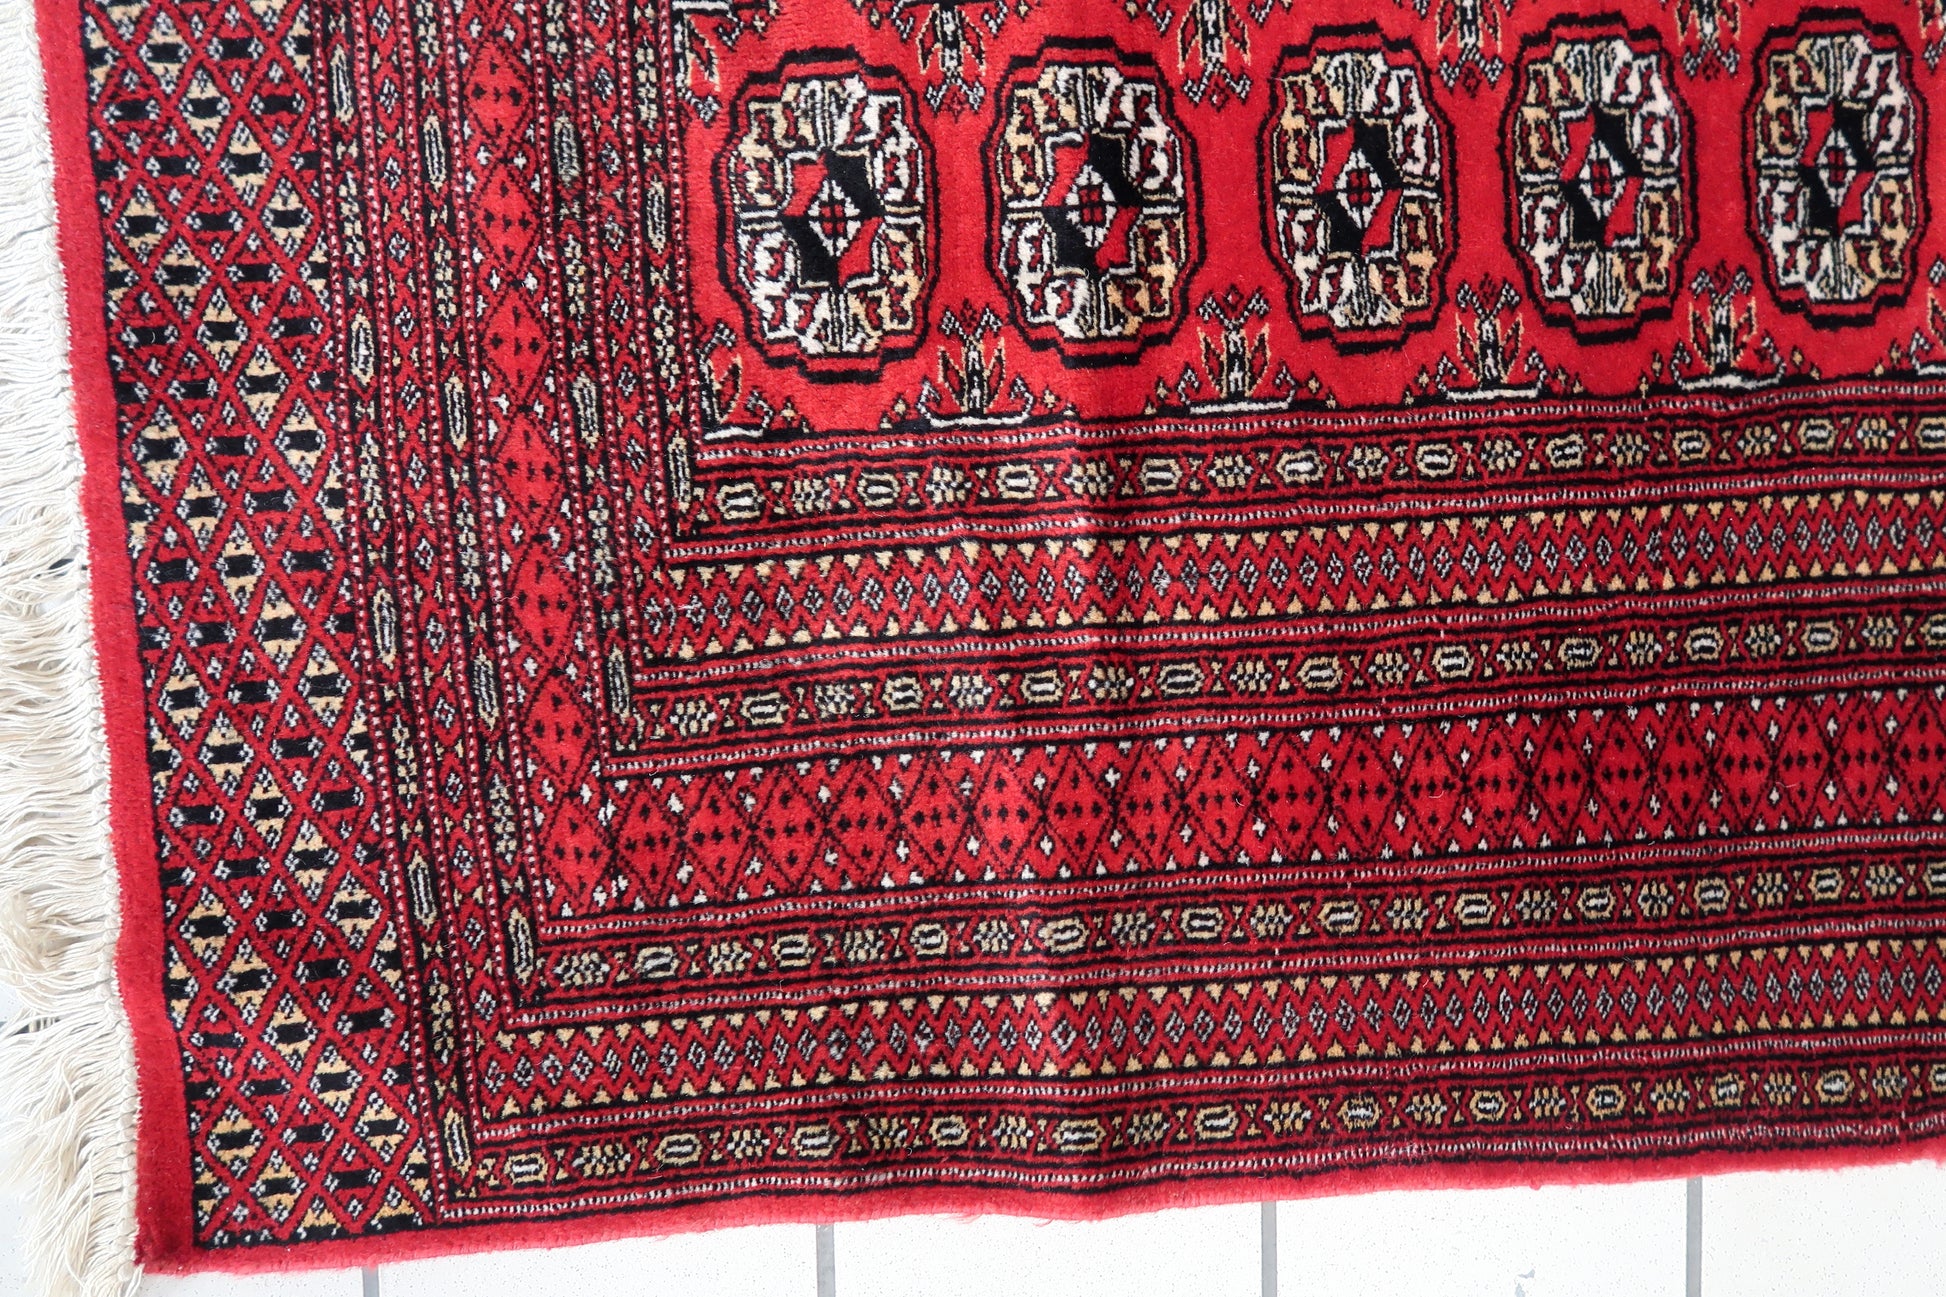 Close-up of Intricate Elephant Foot Design on Bukhara Rug